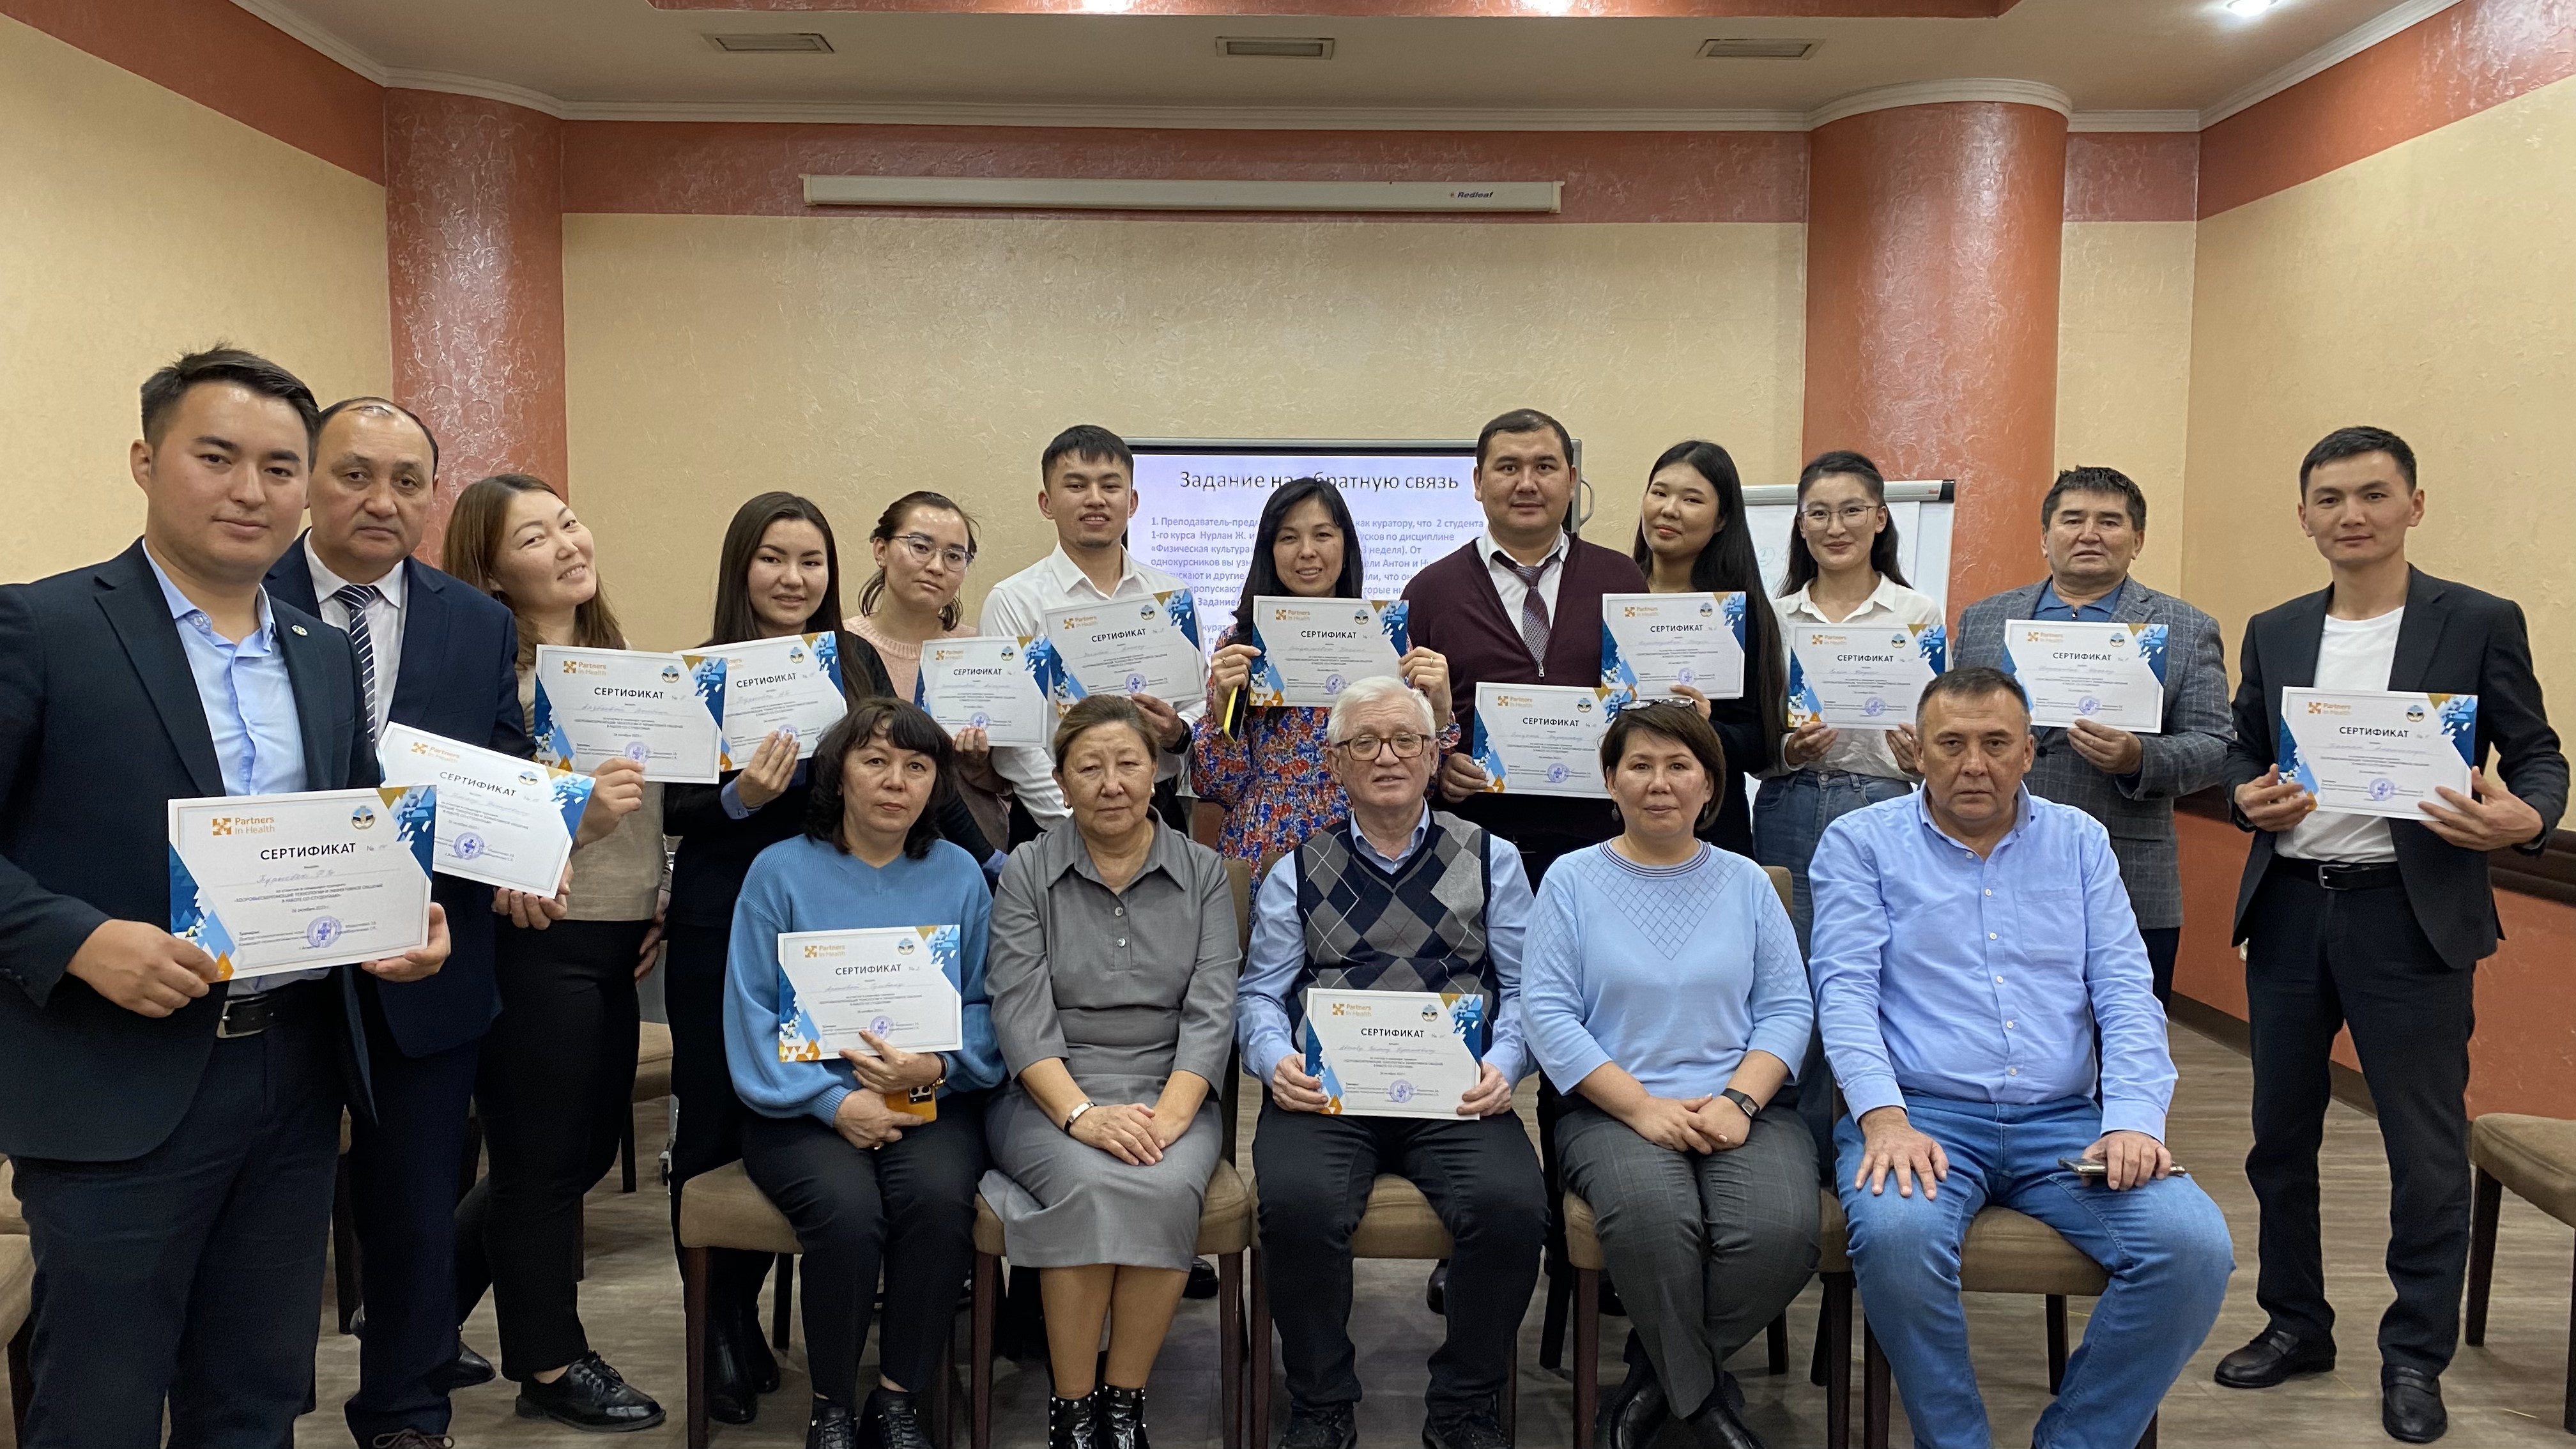 Senior curators of kaznu held a psychological training seminar for working with students